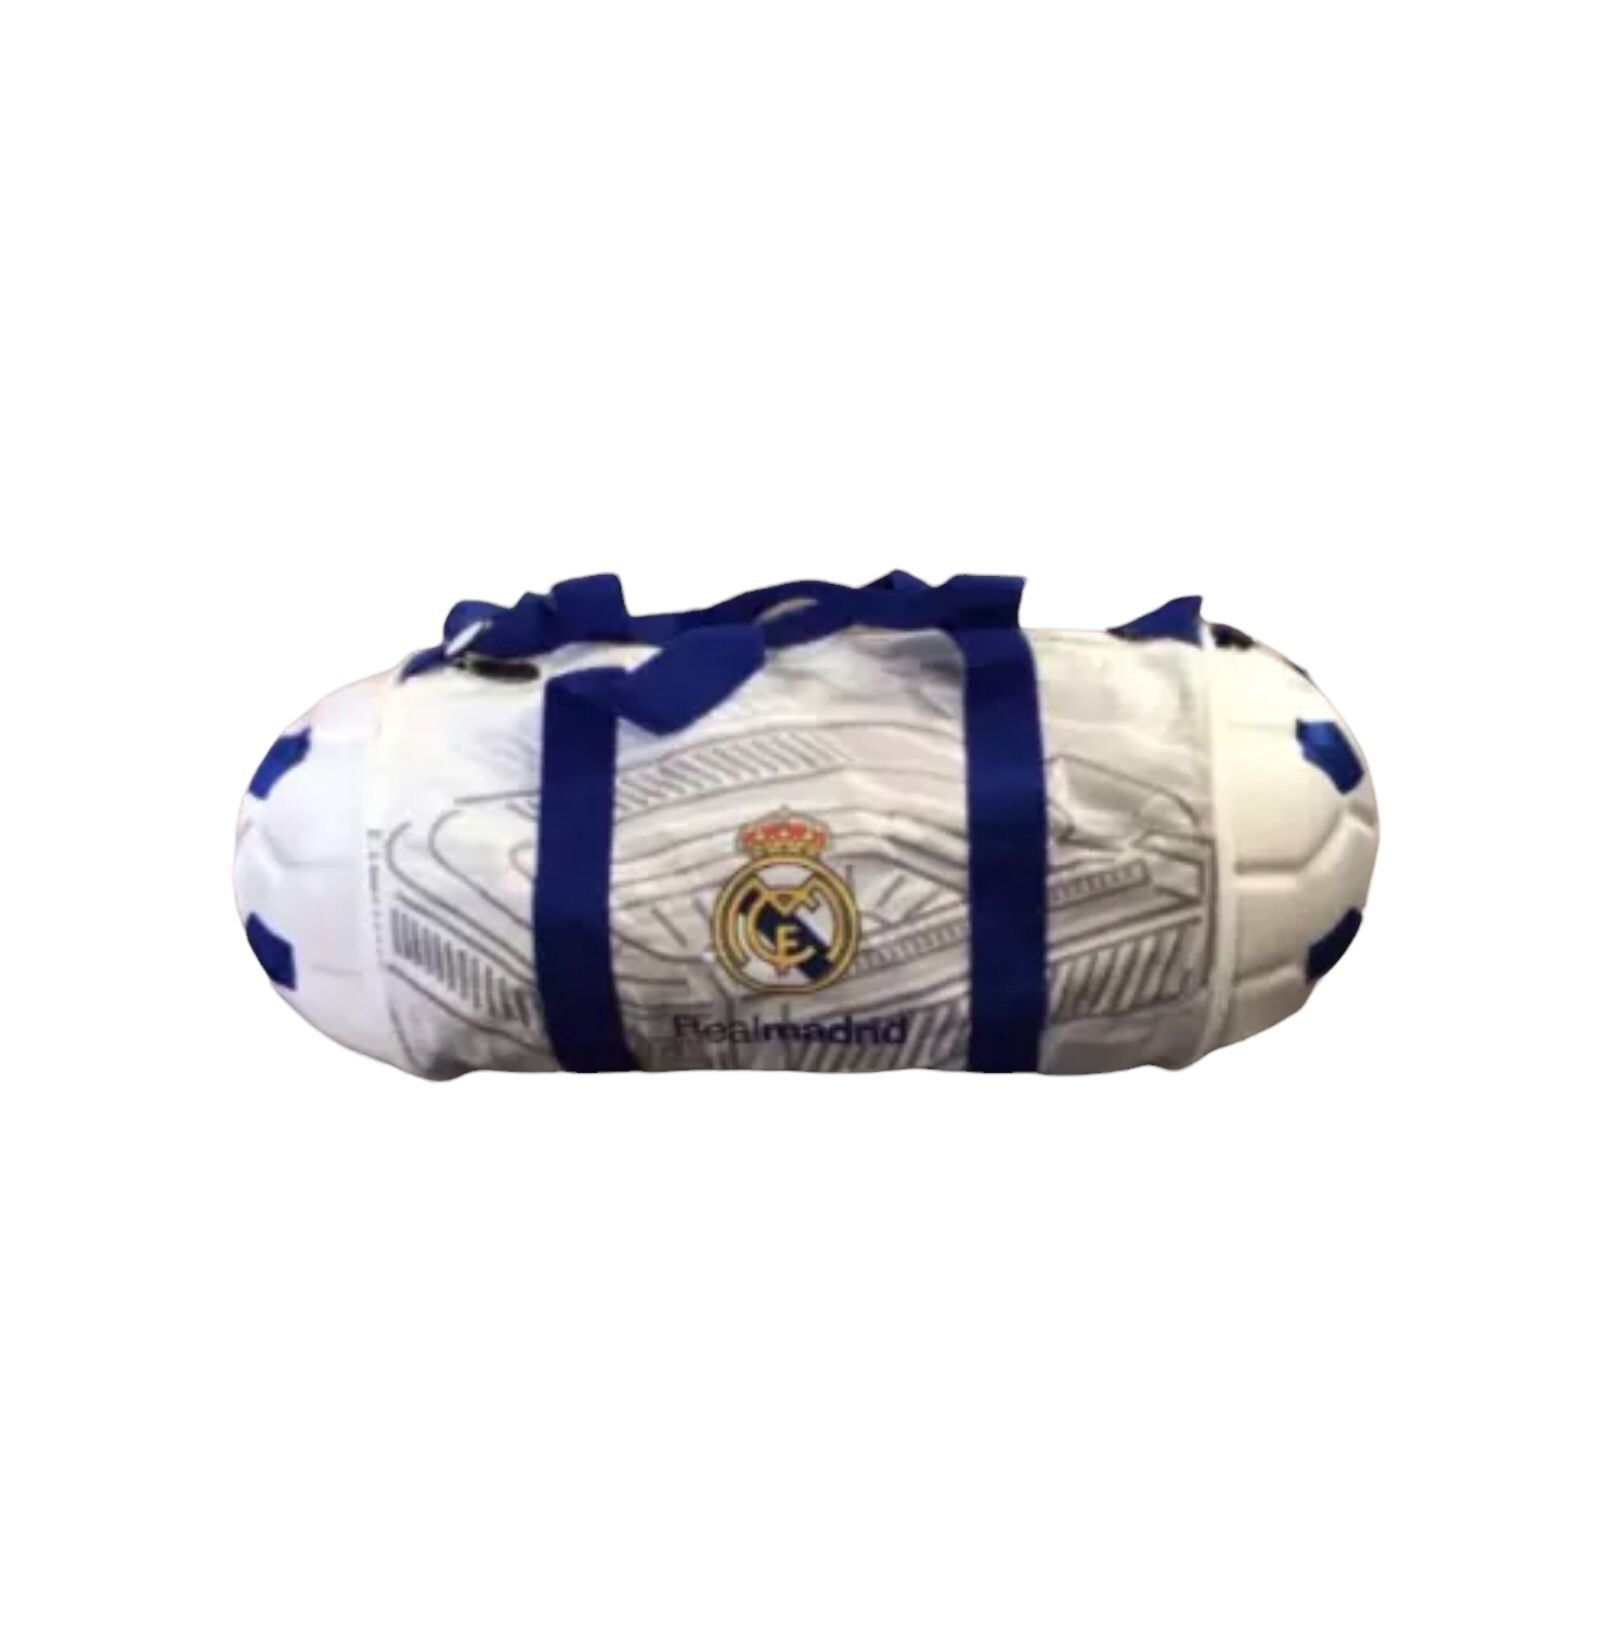 Real Madrid Soccer Ball Duffle Bag Official. New